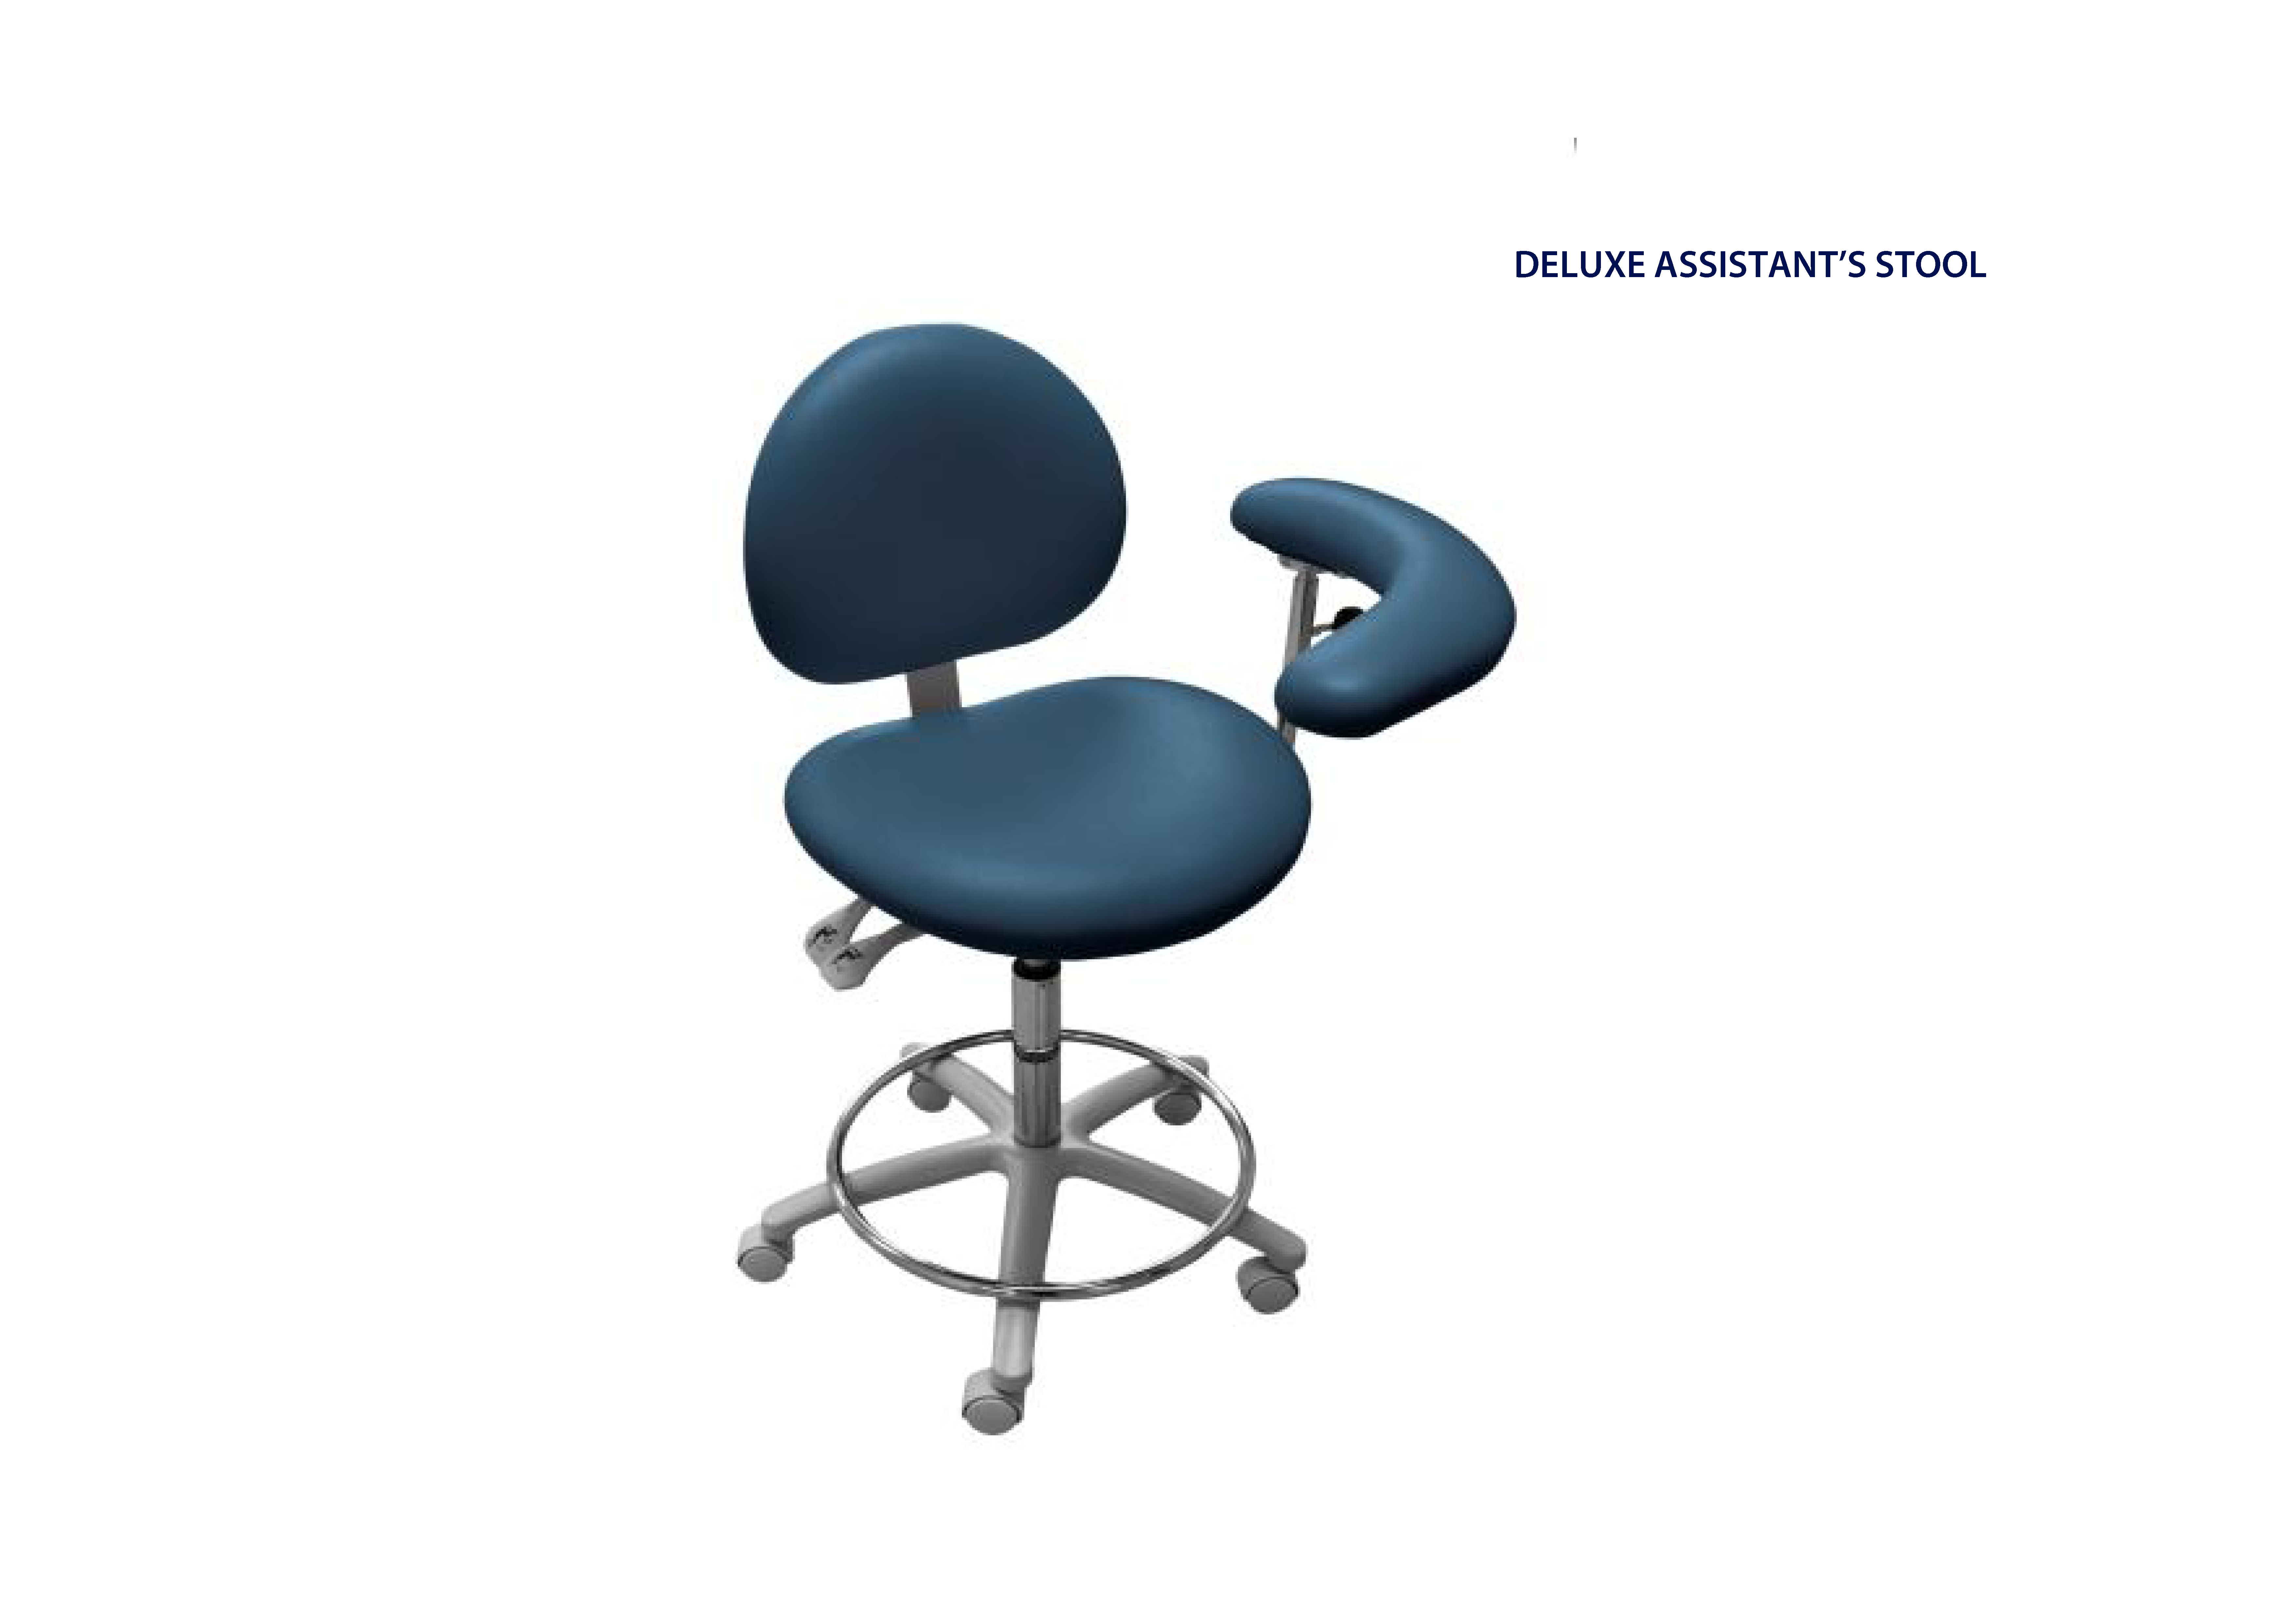 DELUXE ASSISTANT'S STOOL